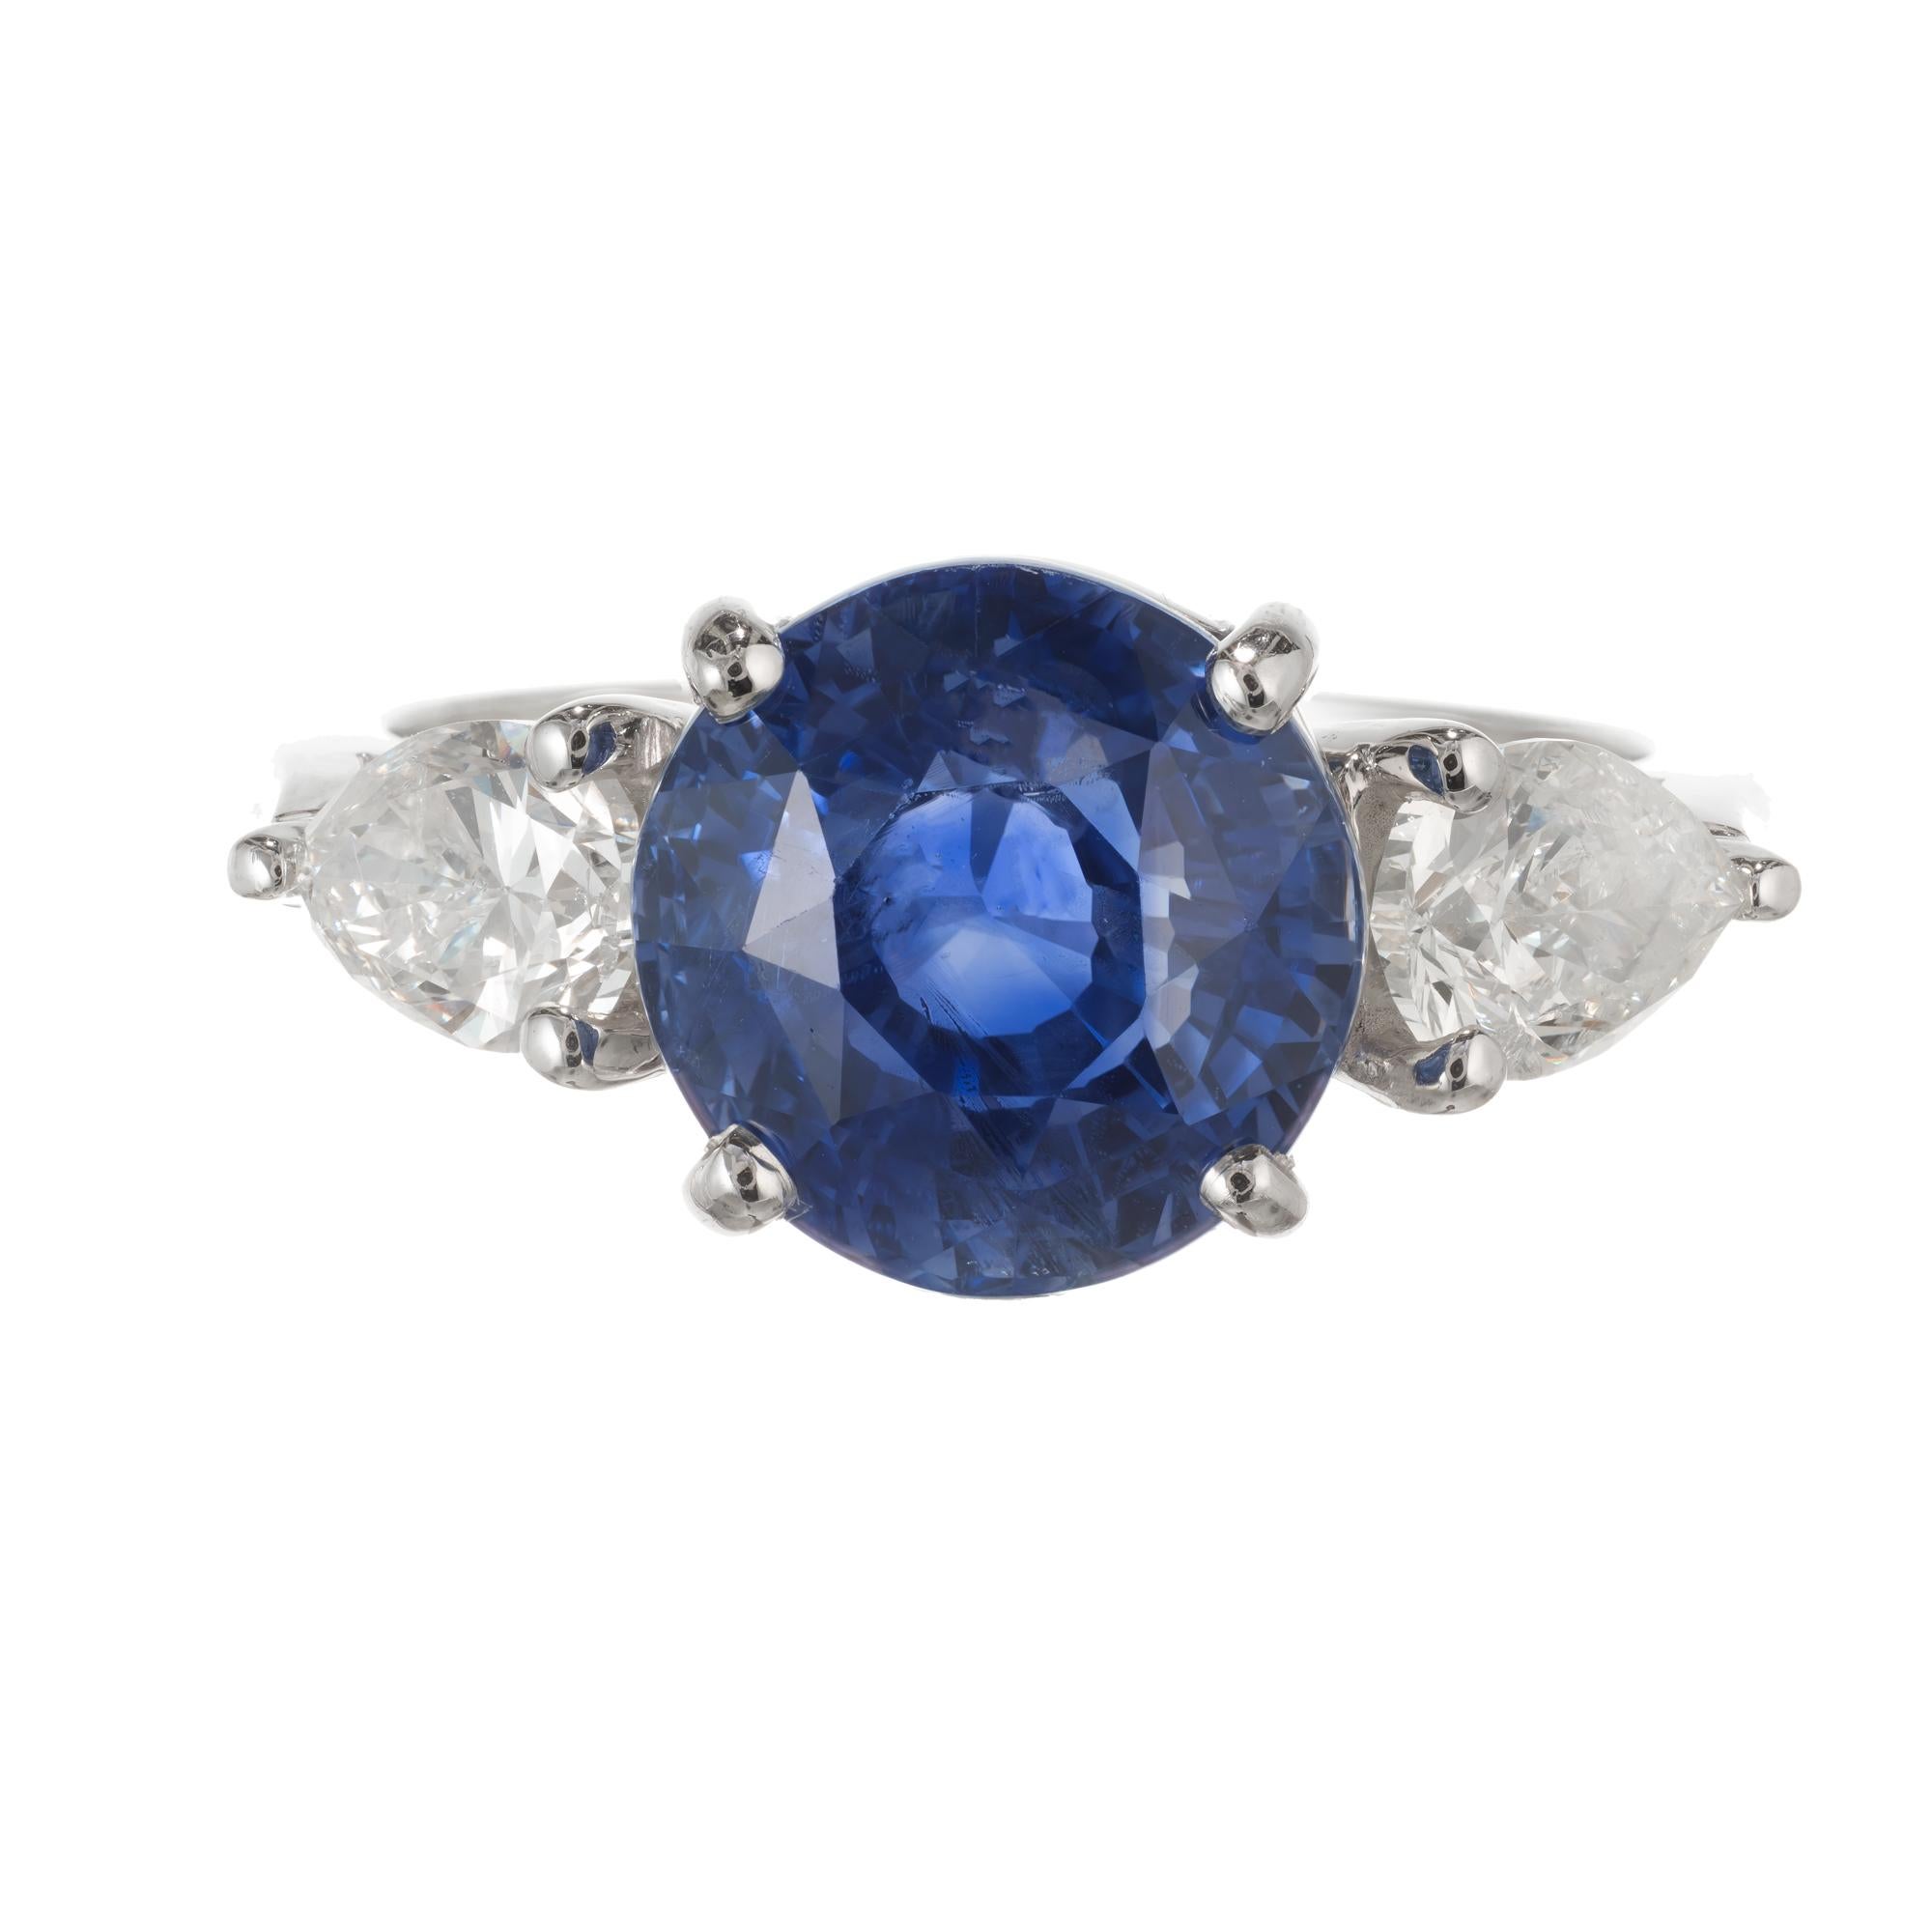 Vibrant blue sapphire and diamond engagement ring. Natural no heat round old European cut center Sapphire GIA certified in a platinum three-stone setting with two pear shaped side diamonds, created by the Peter Suchy Workshop. 

1 round vibrant blue